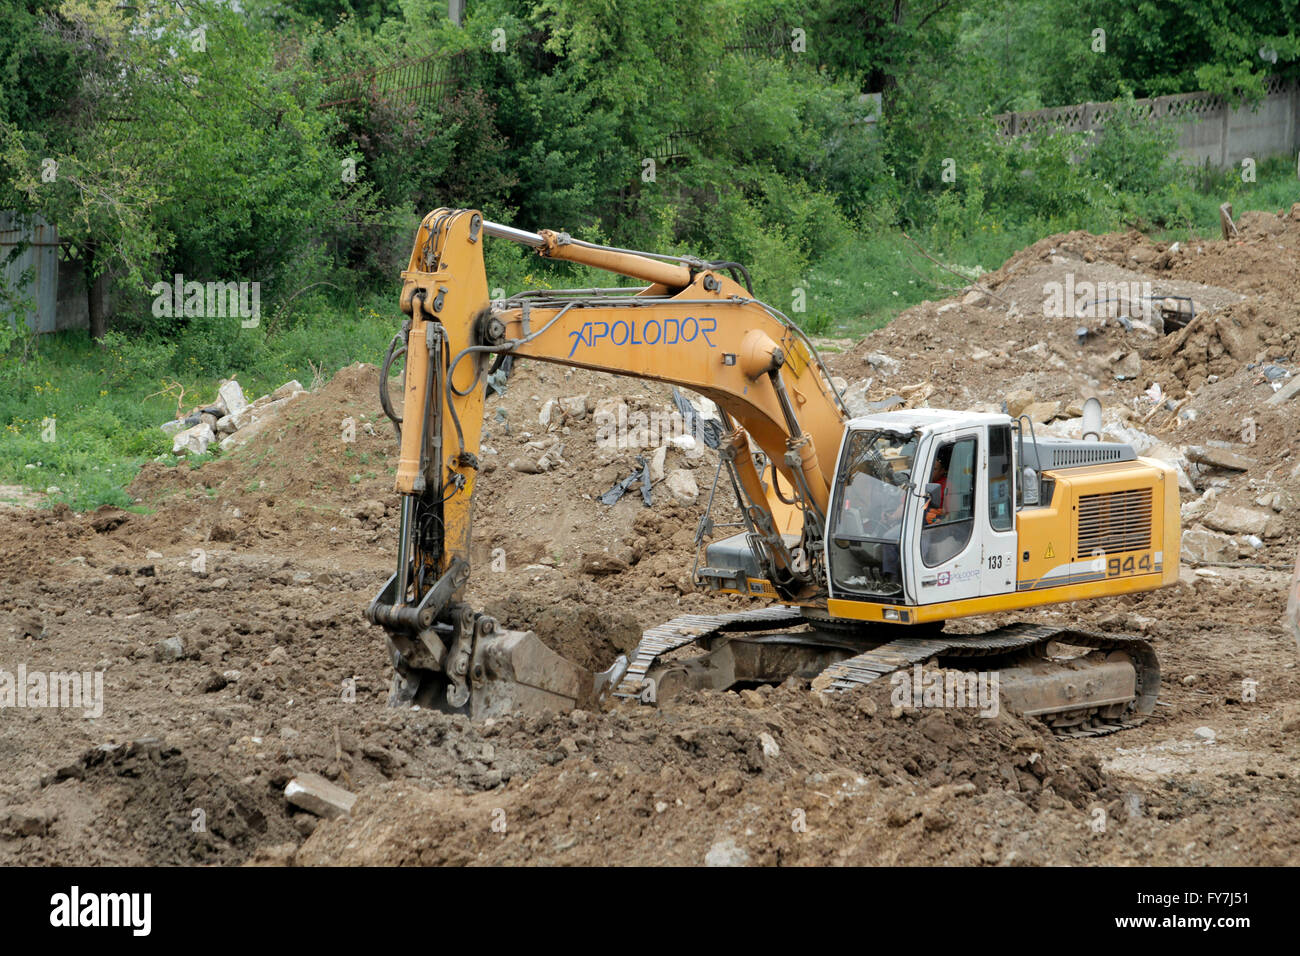 Bucharest, Romania, April 19, 2016: An excavator working removing earth on a construction site. Stock Photo